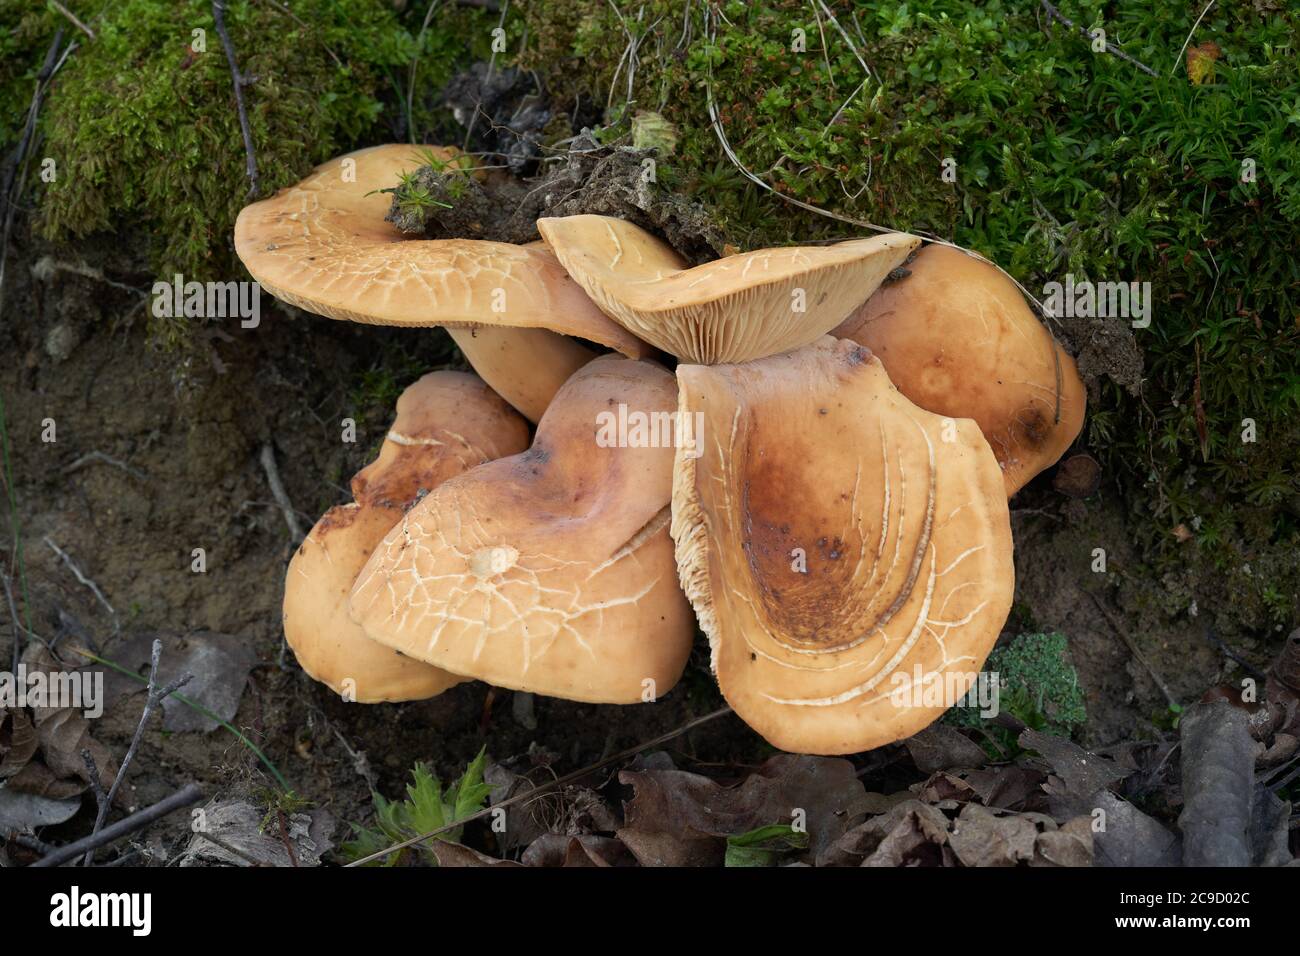 Edible mushroom Lactifluus volemus in the birch forest. Known as Fishy Milkcap or Voluminous-latex Milky. Group of wild mushrooms growing in the moss. Stock Photo